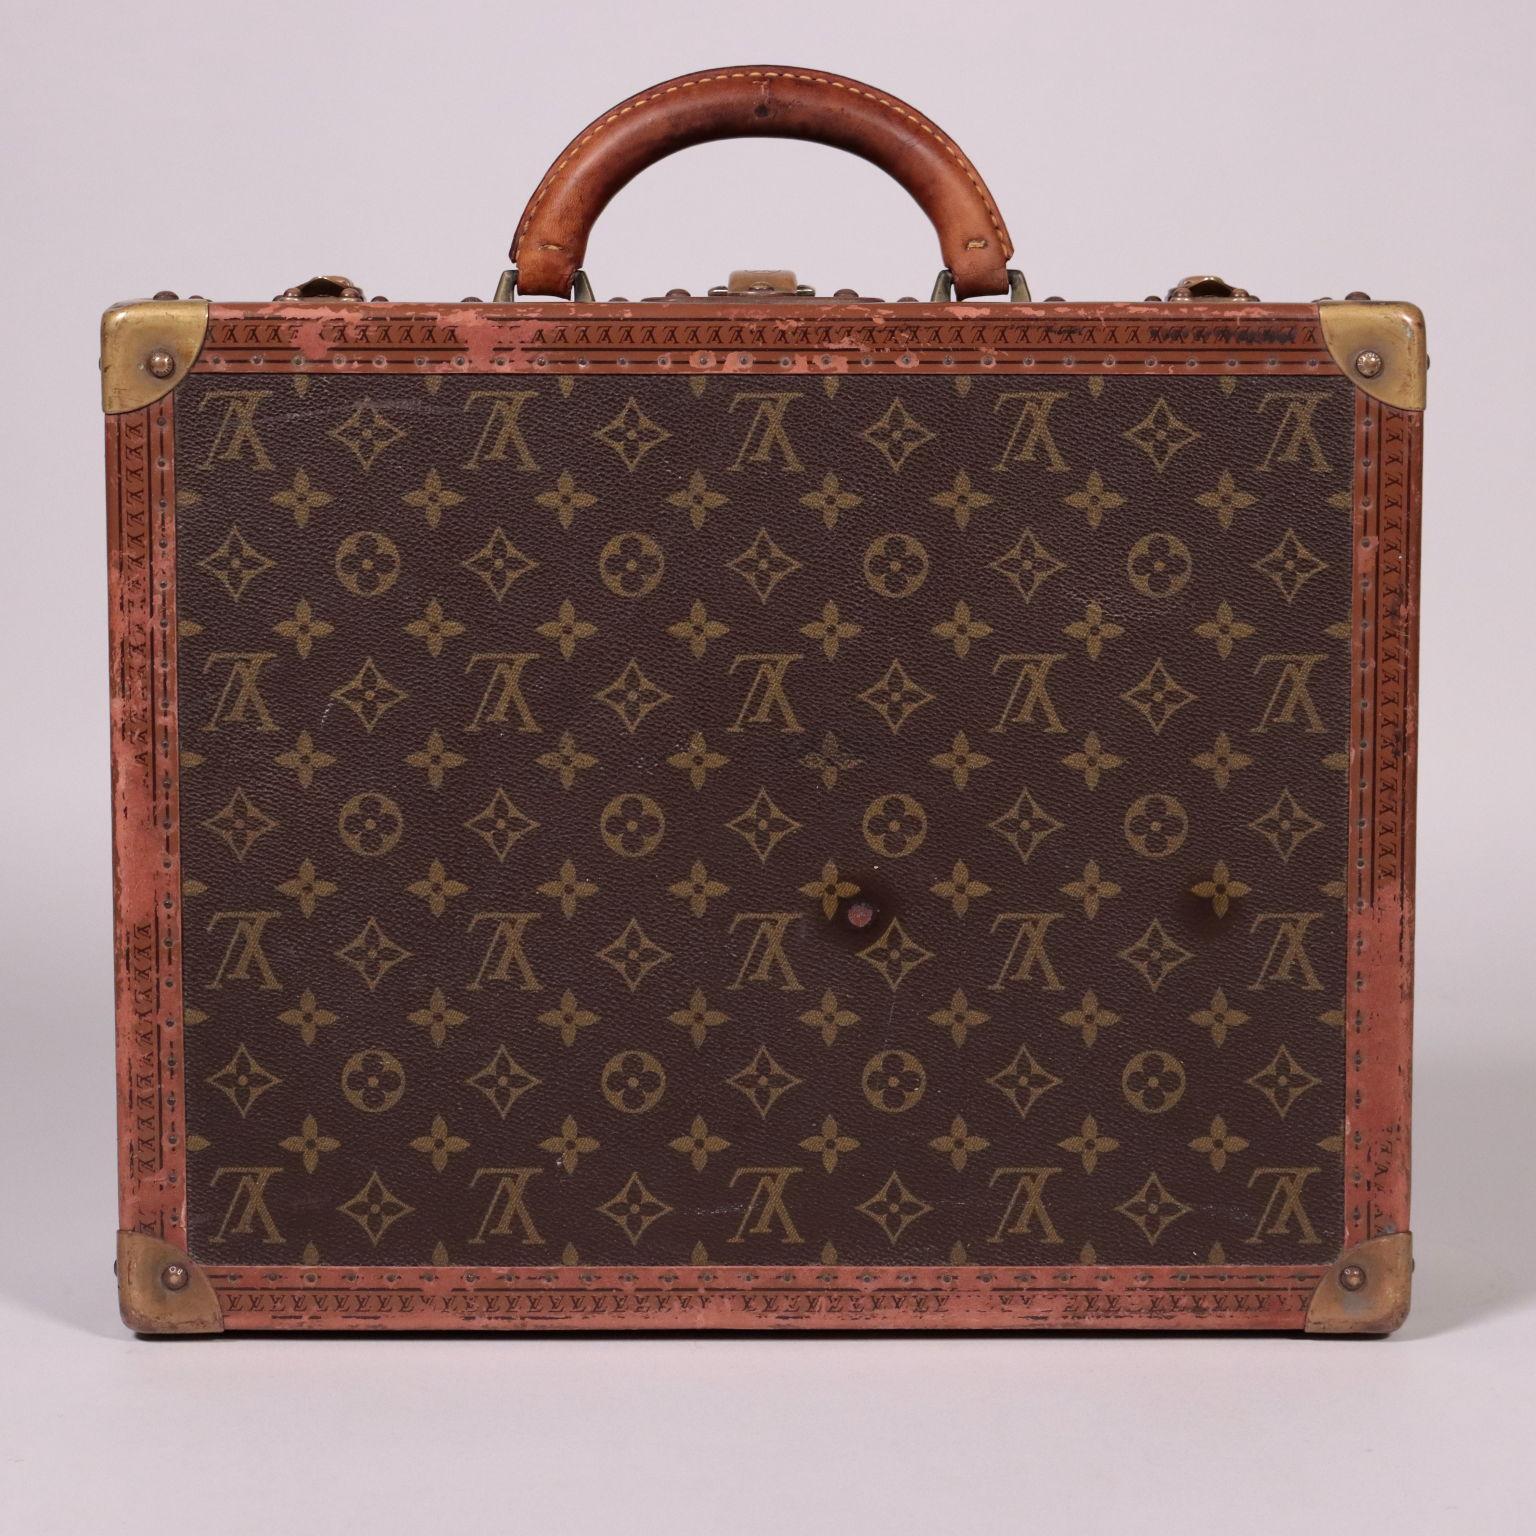 French Cotteville 40 Case Louis Vuitton Leather Brass Canvas, 1970s